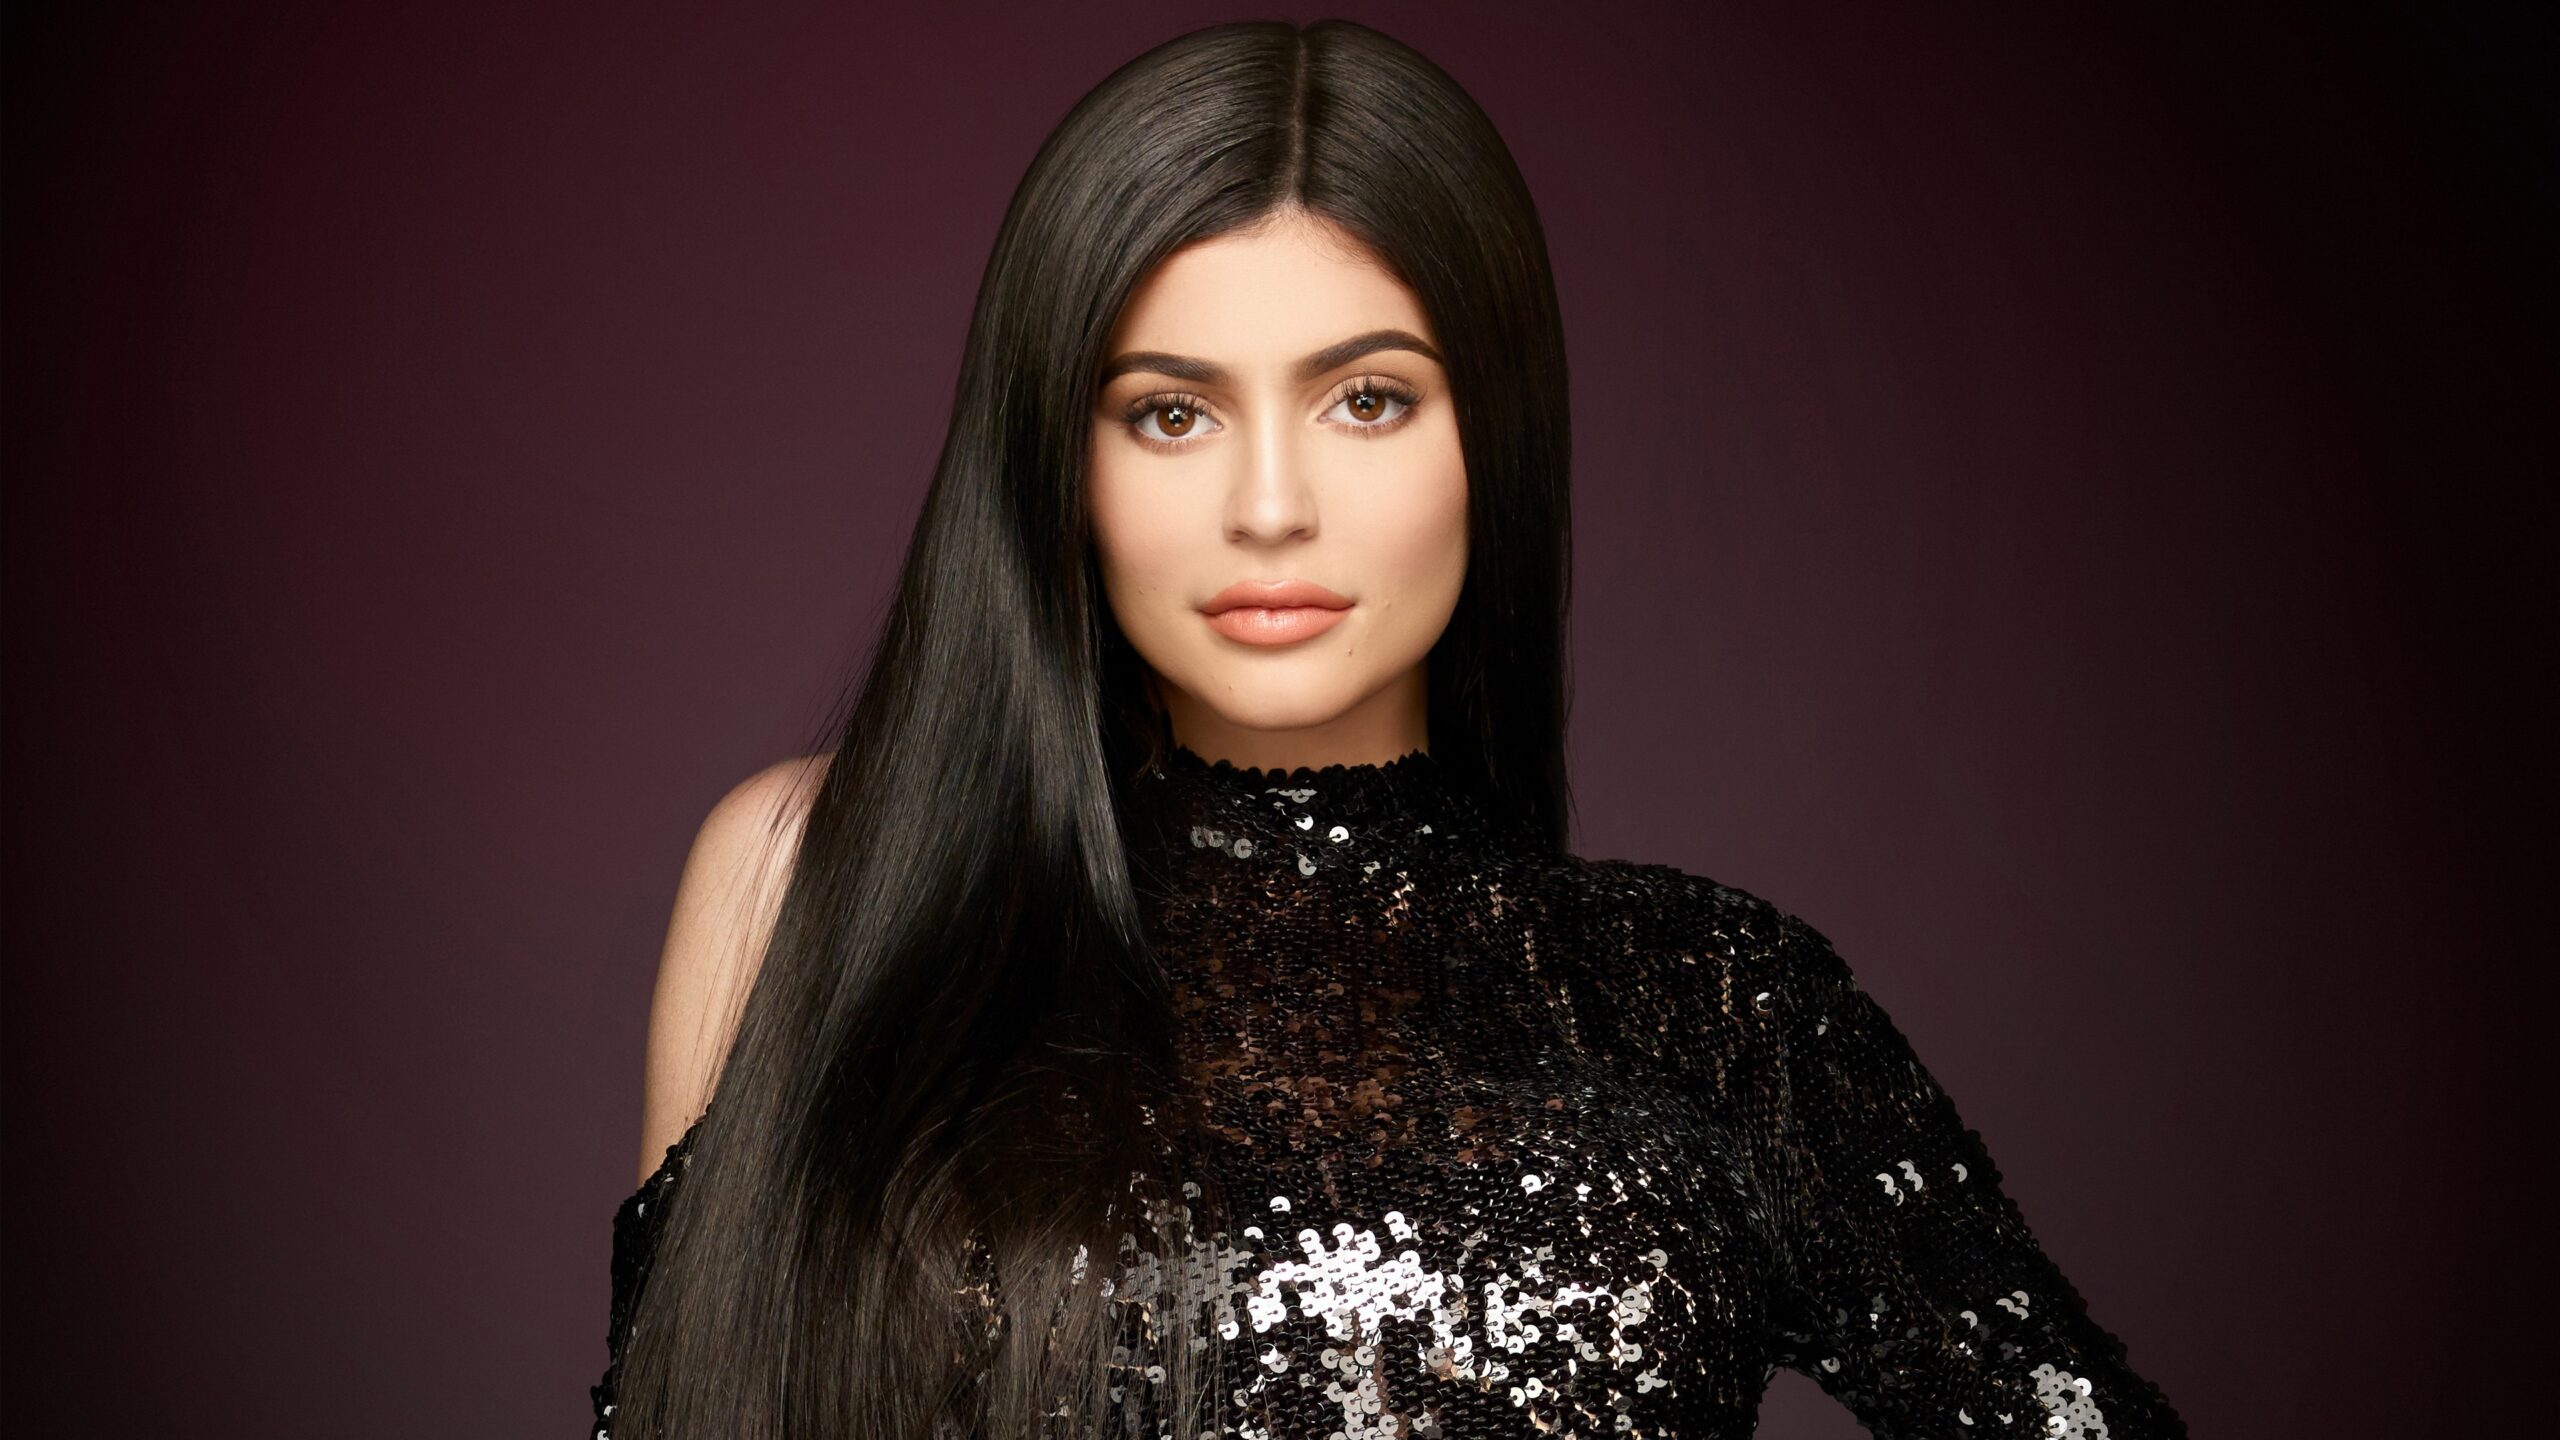 what is the net worth of kylie jenner